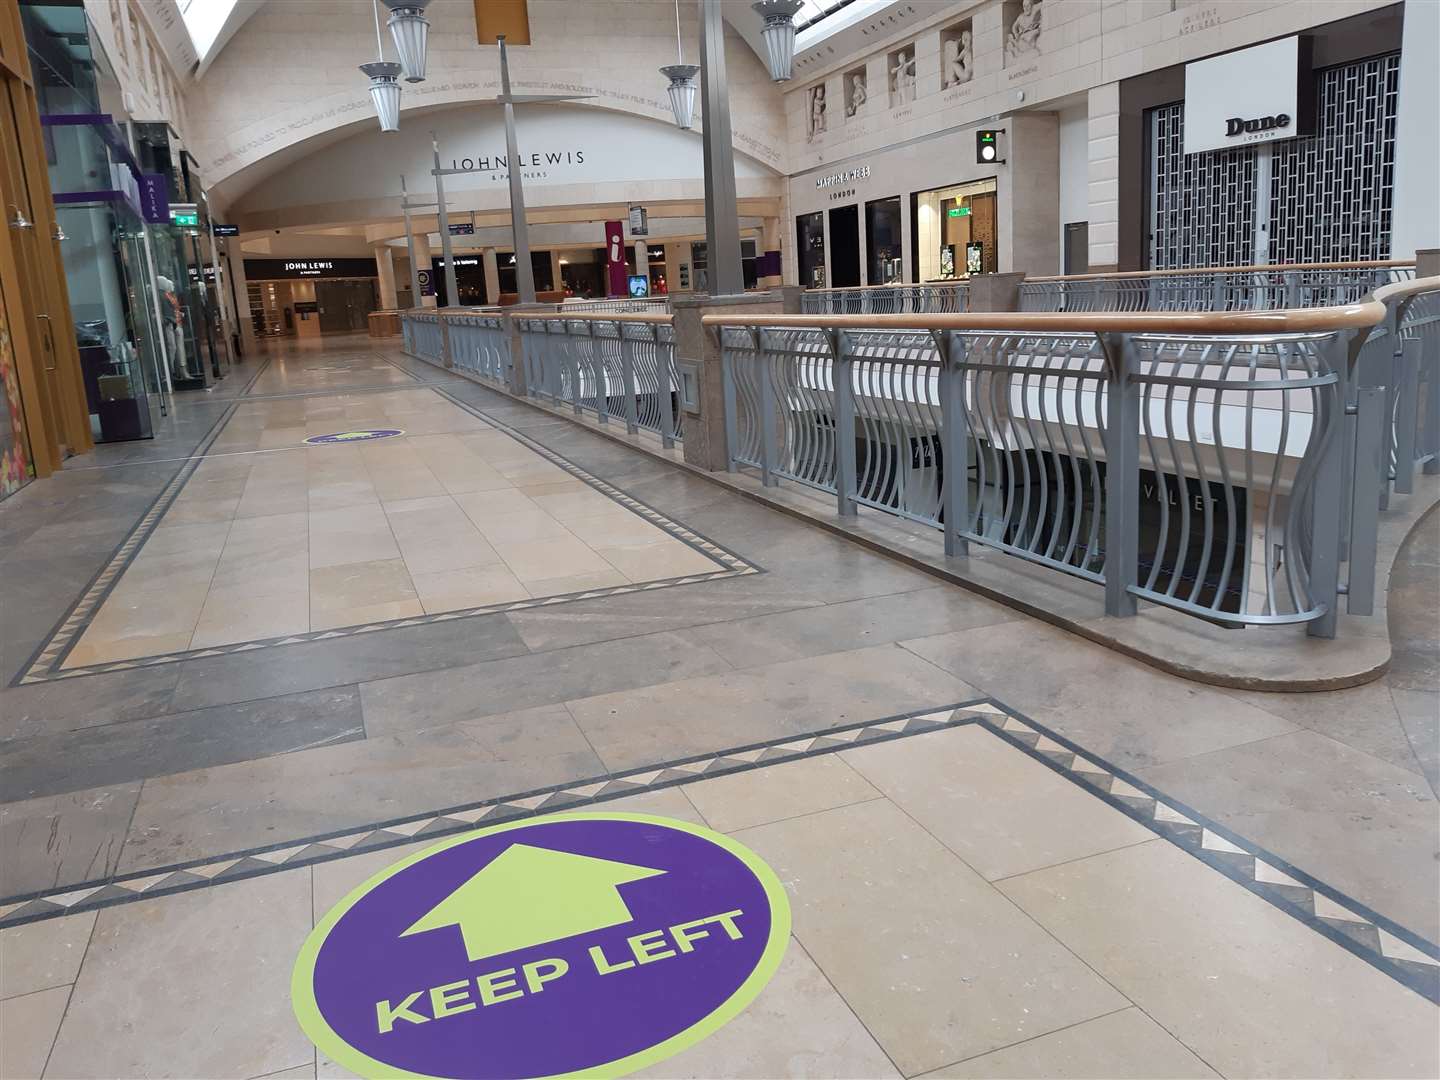 Bluewater will hope the crowds flock back when stores reopen on April 12